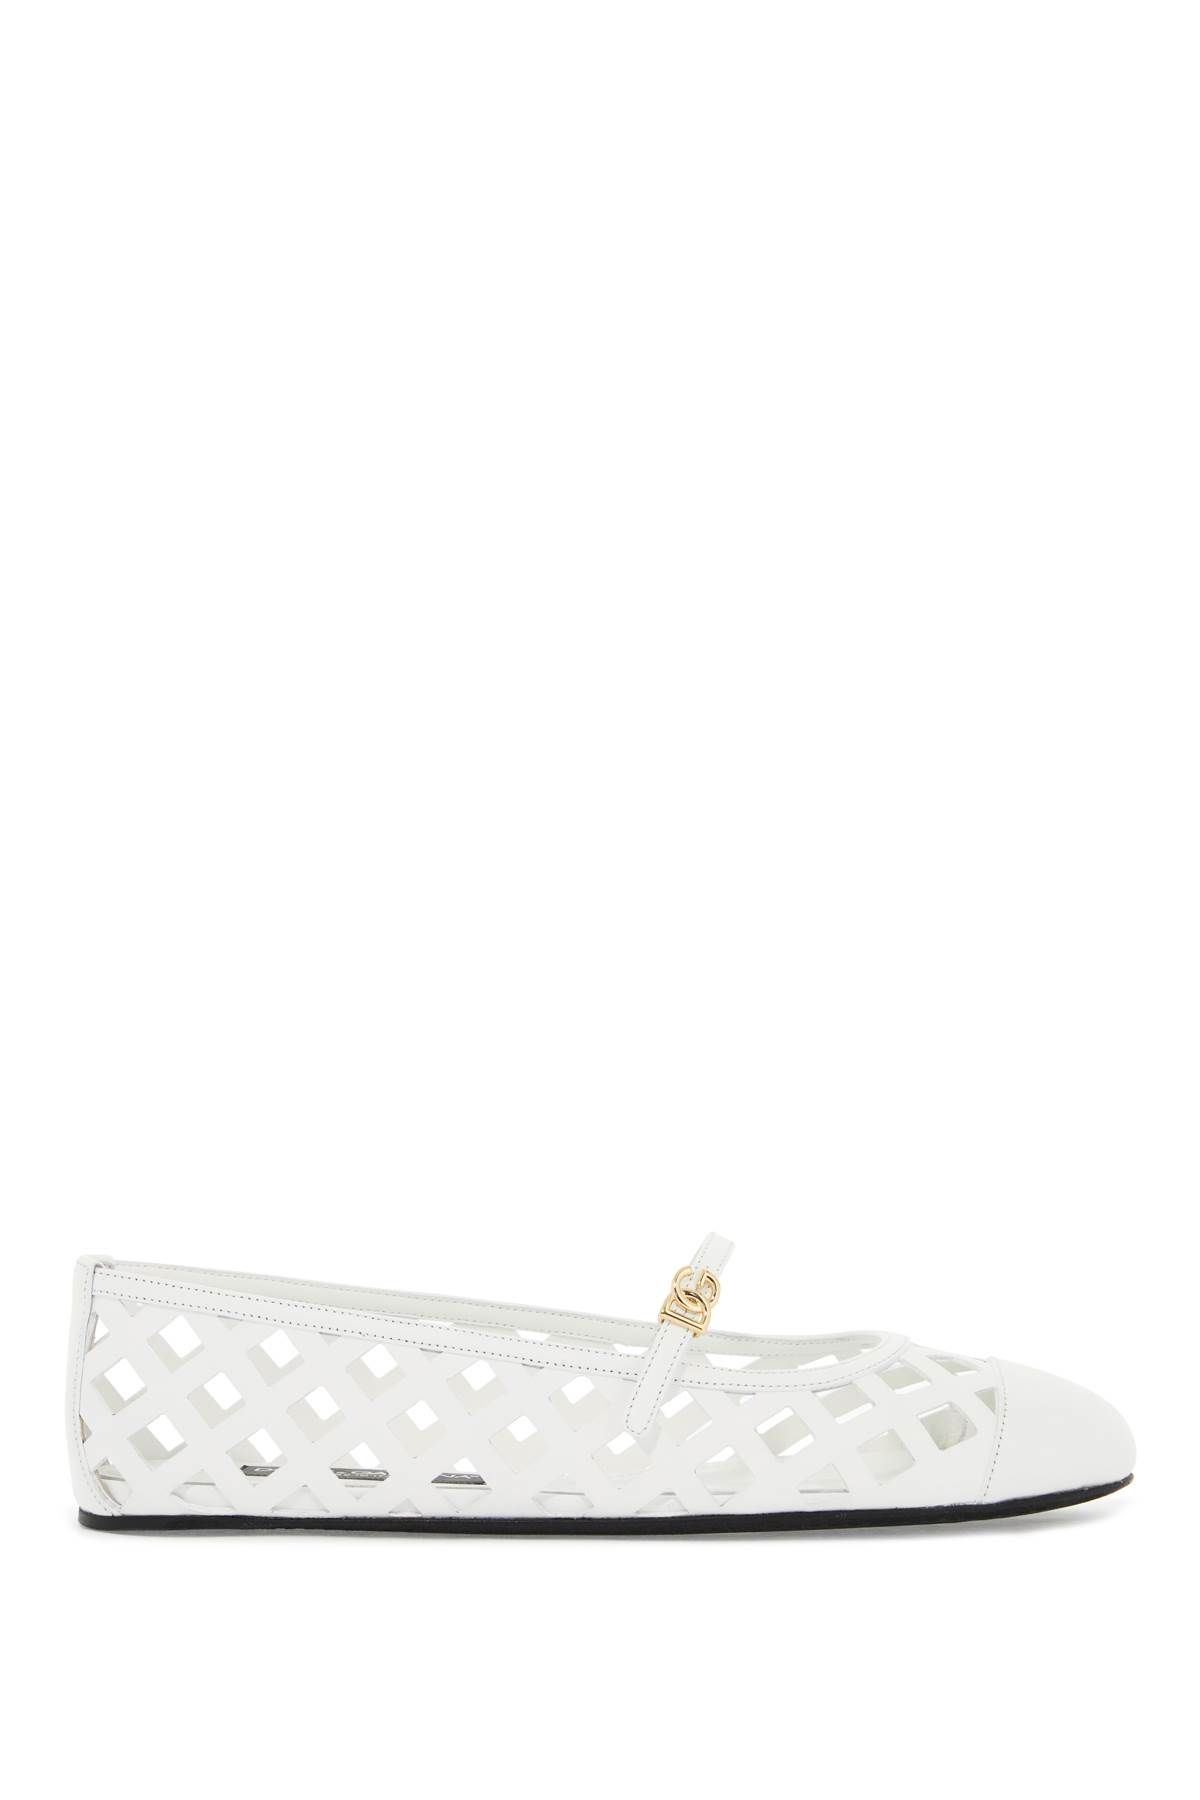 Dolce & Gabbana DOLCE & GABBANA "perforated leather odette